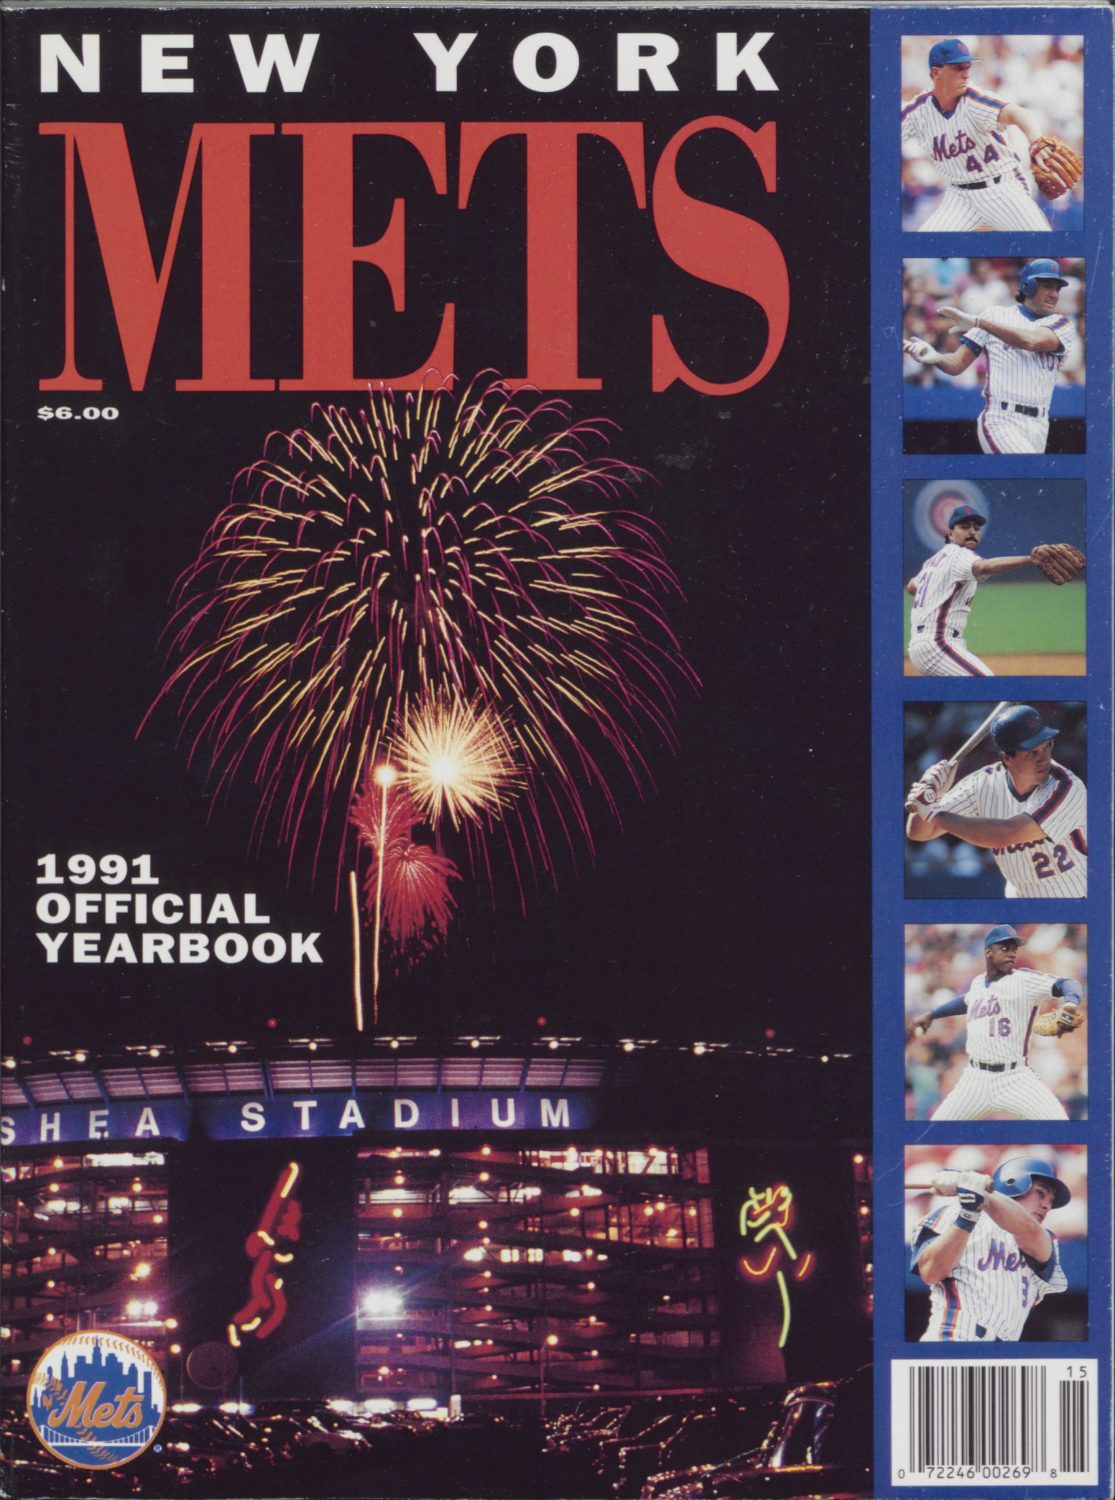 1991 New York Mets Yearbook: Fireworks at Shea